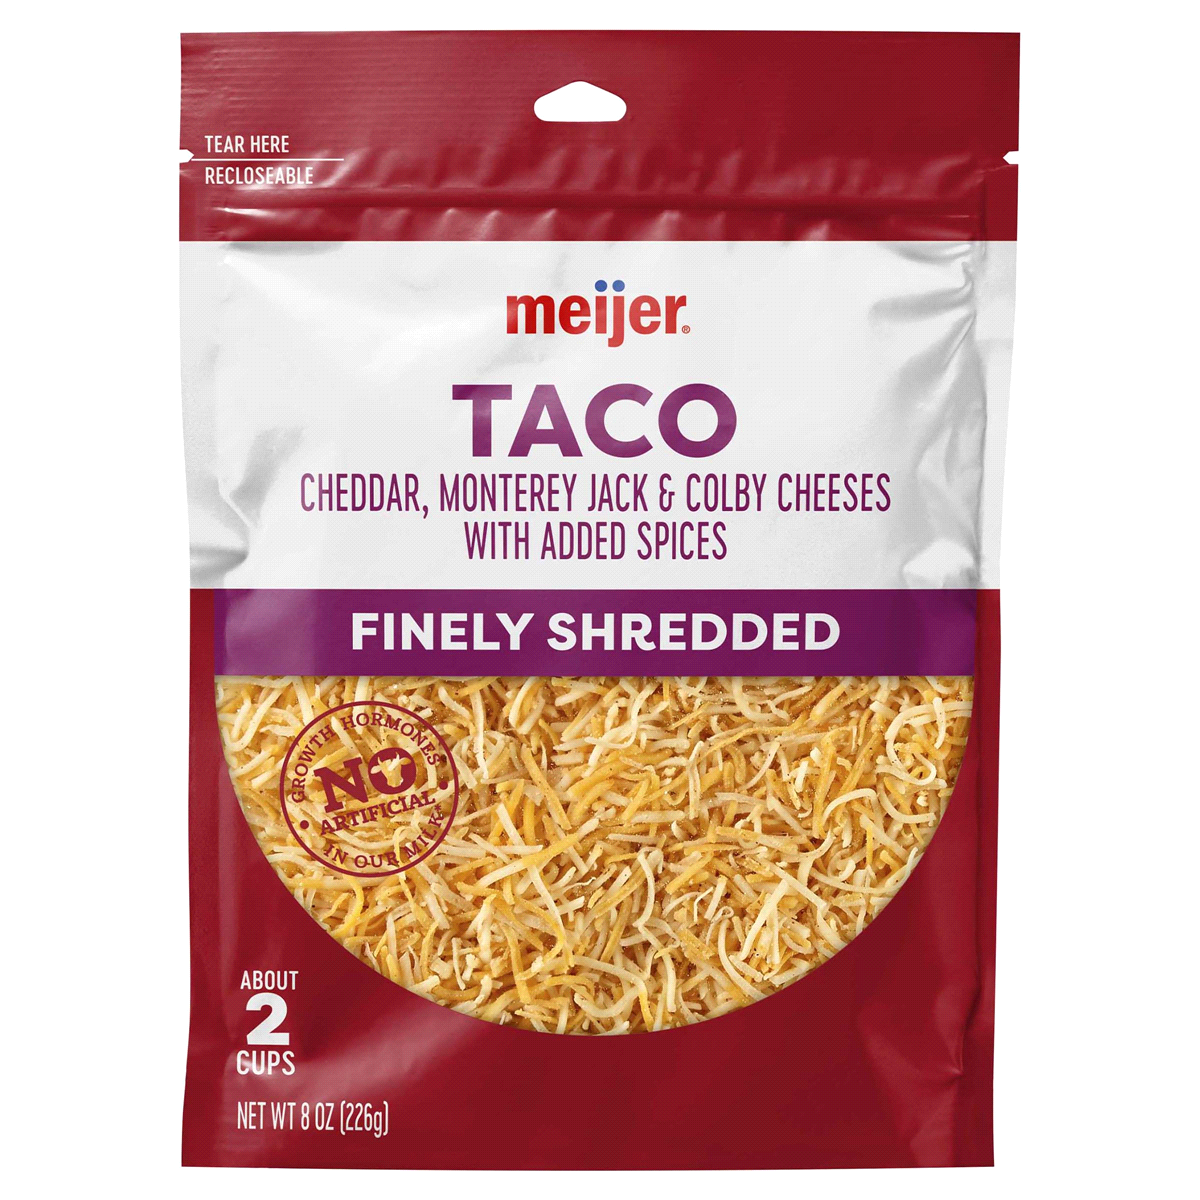 slide 1 of 5, Meijer Finely Shredded Taco Cheese with Spices, 8 oz